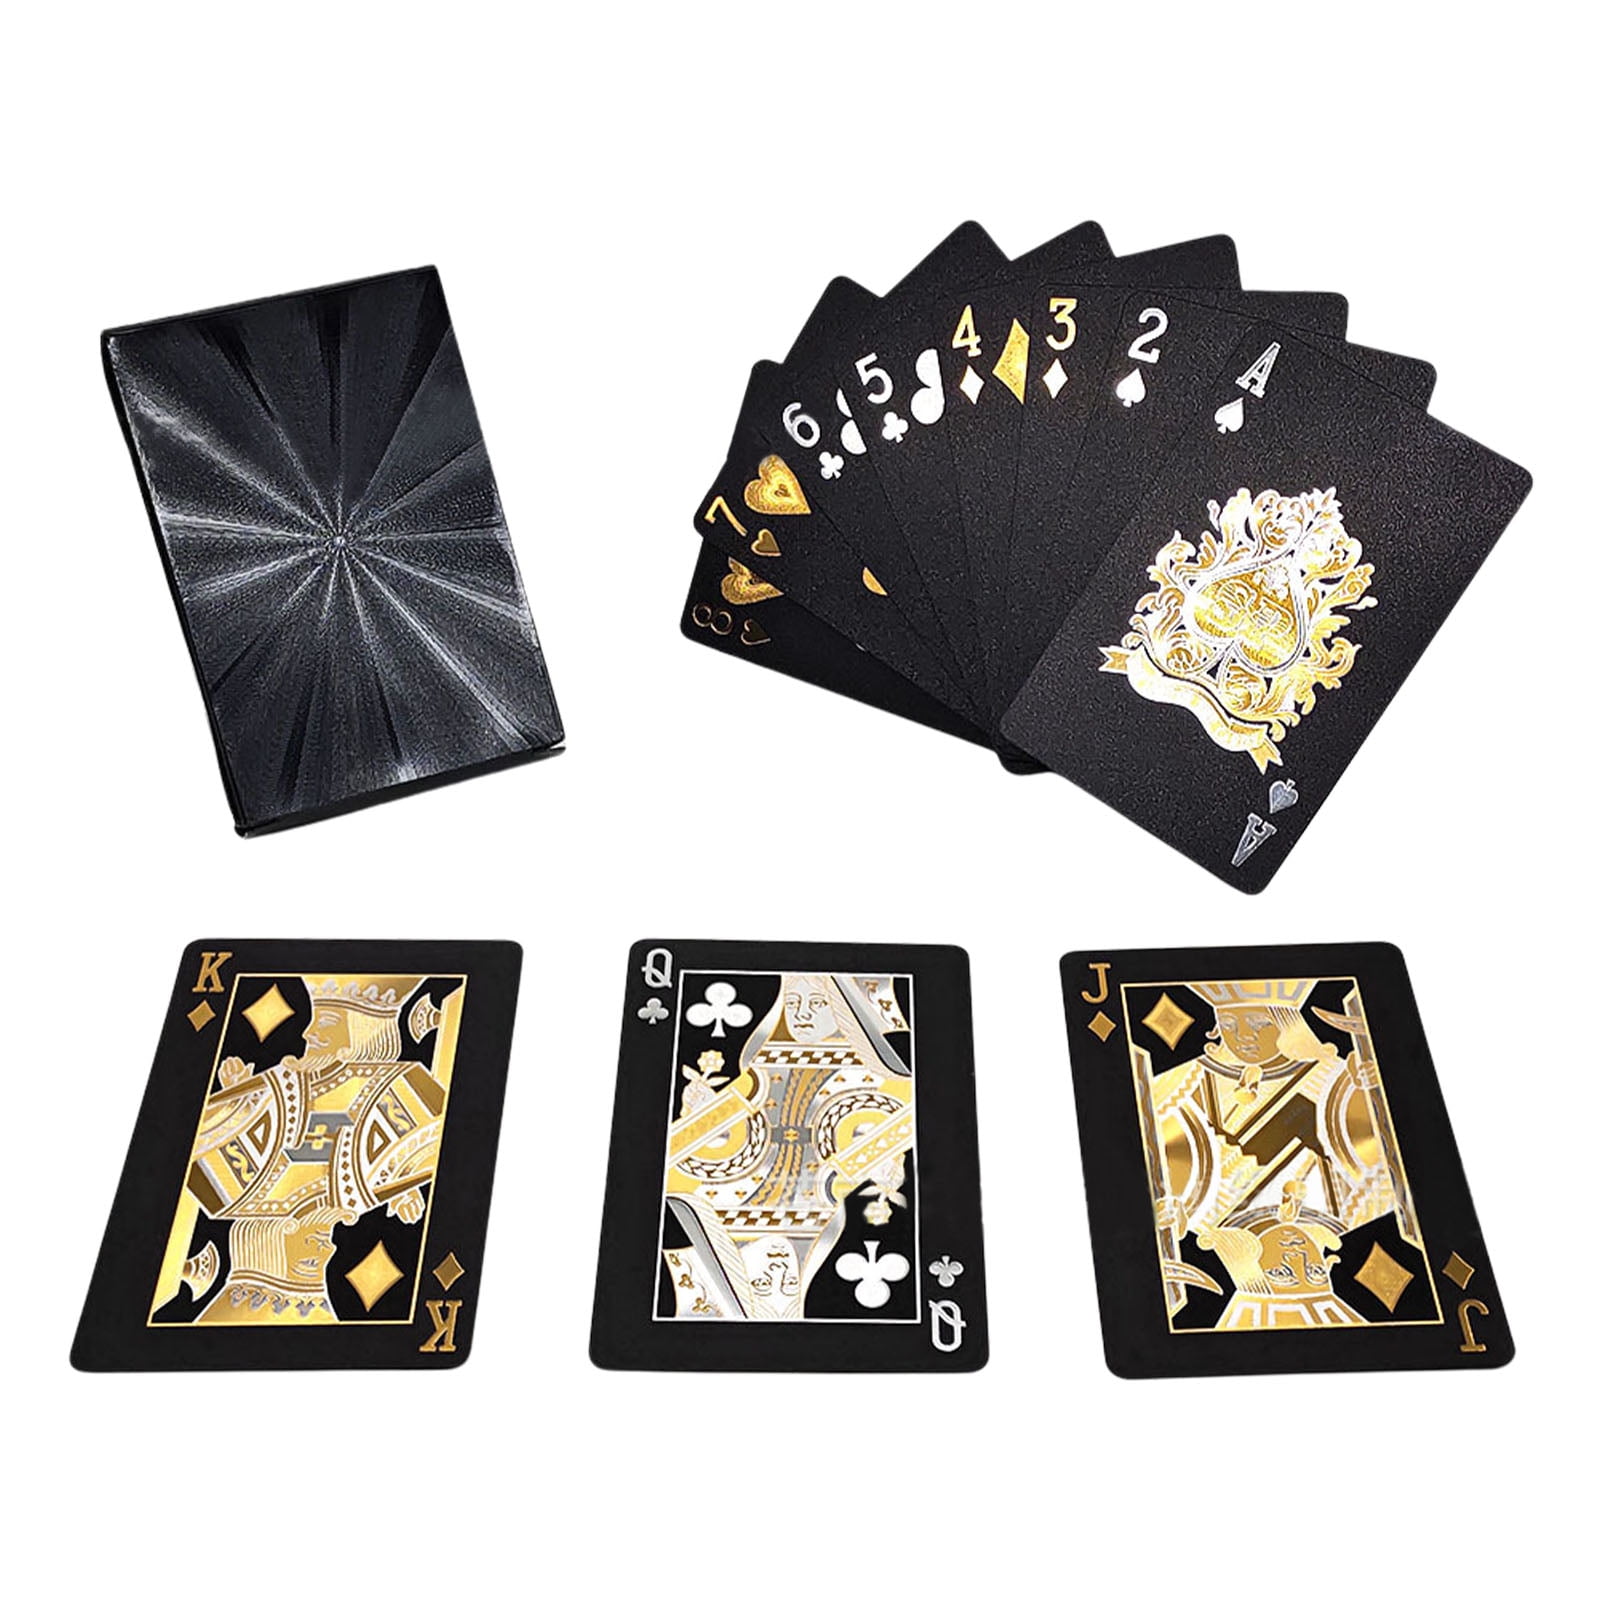 Waterproof Plastic Playing Cards Poker Card Black Foil FamilyGame Gift Silver UK 